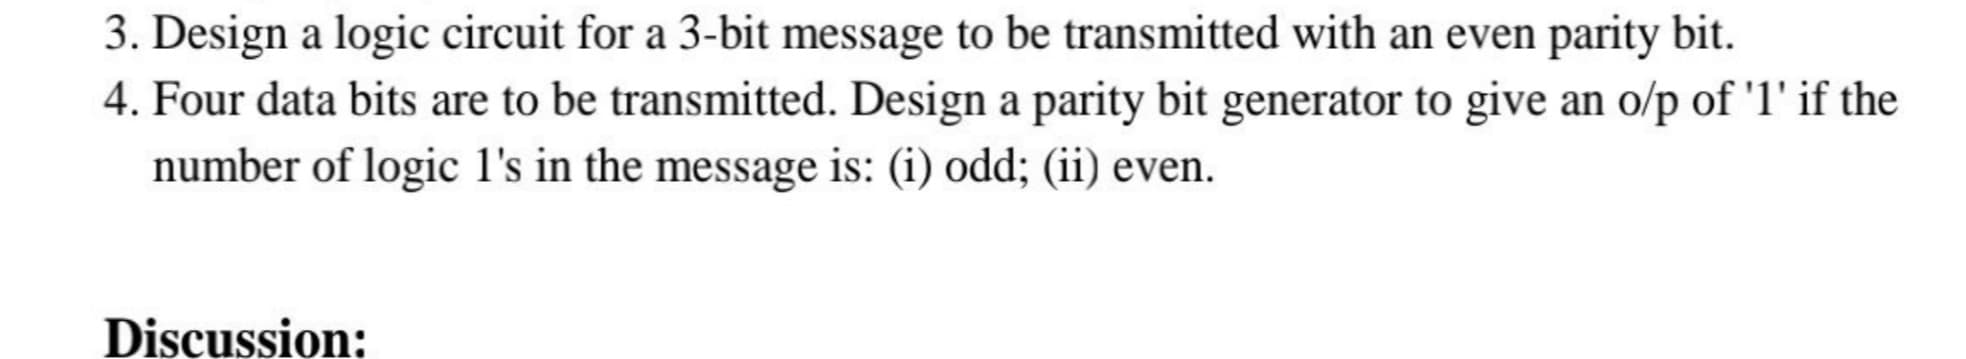 Design a logic circuit for a 3-bit message to be transmitted with an even parity bit.
Four data bits are to be transmitted. Design a parity bit generator to give an o/p of 'l' if the
number of logic l's in the message is: (i) odd; (ii) even.
